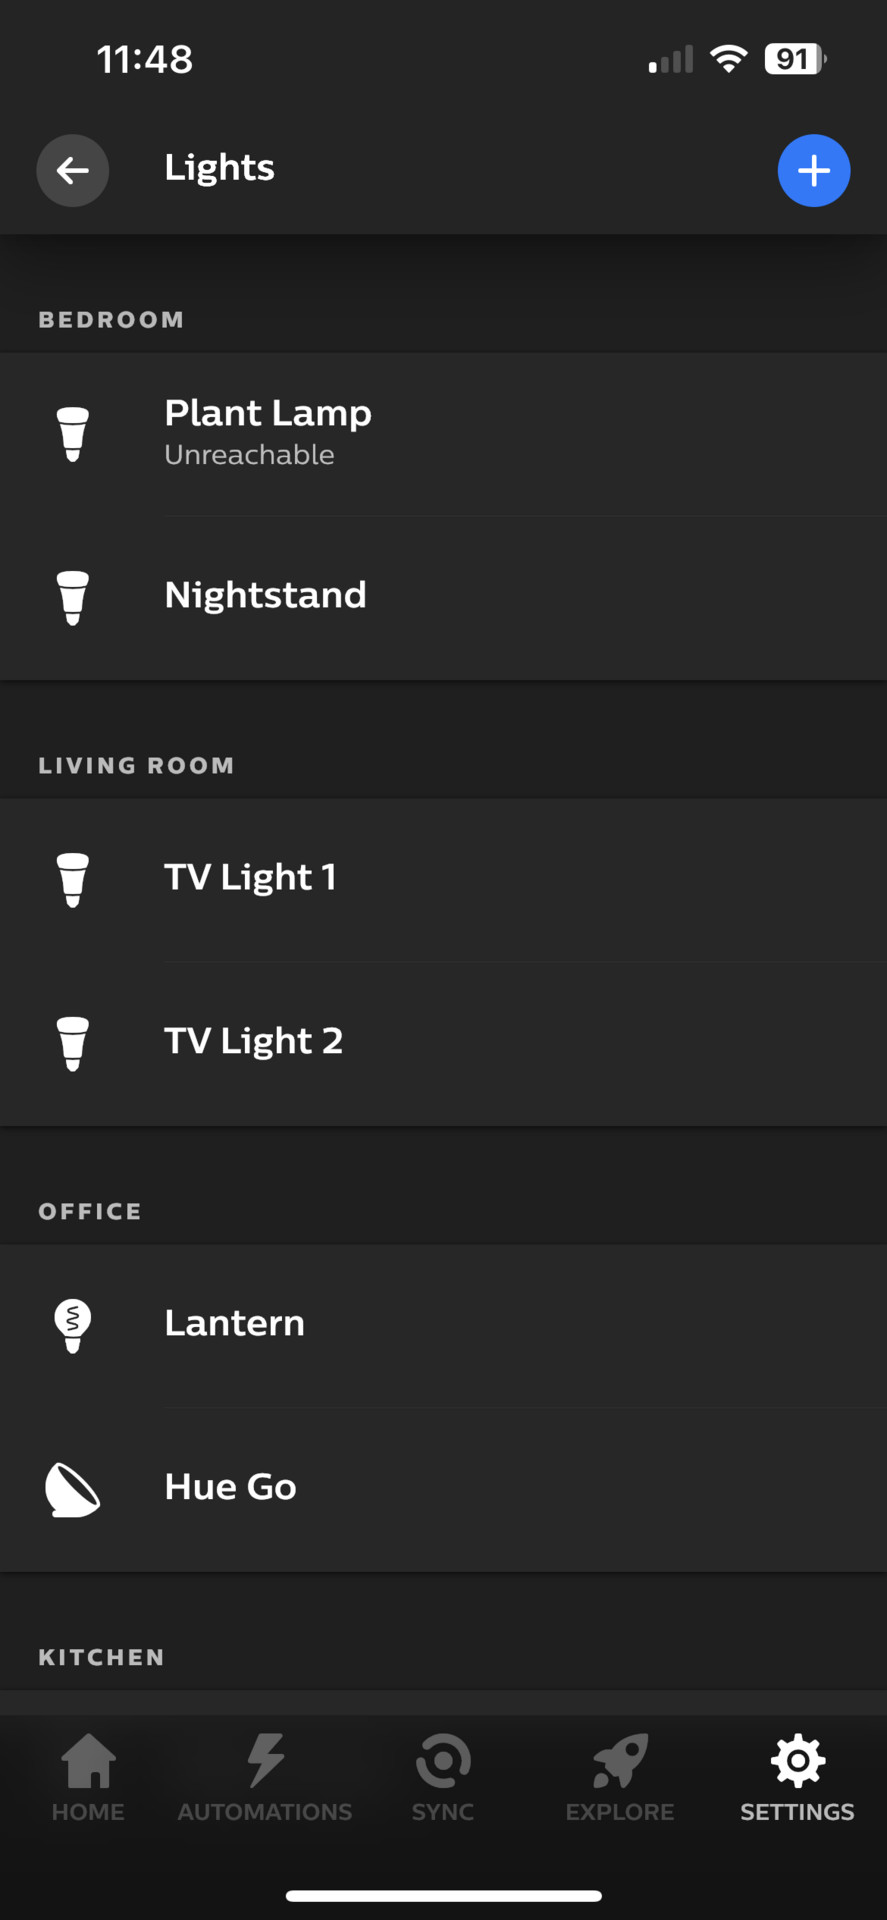 Lights in the Philips Hue app